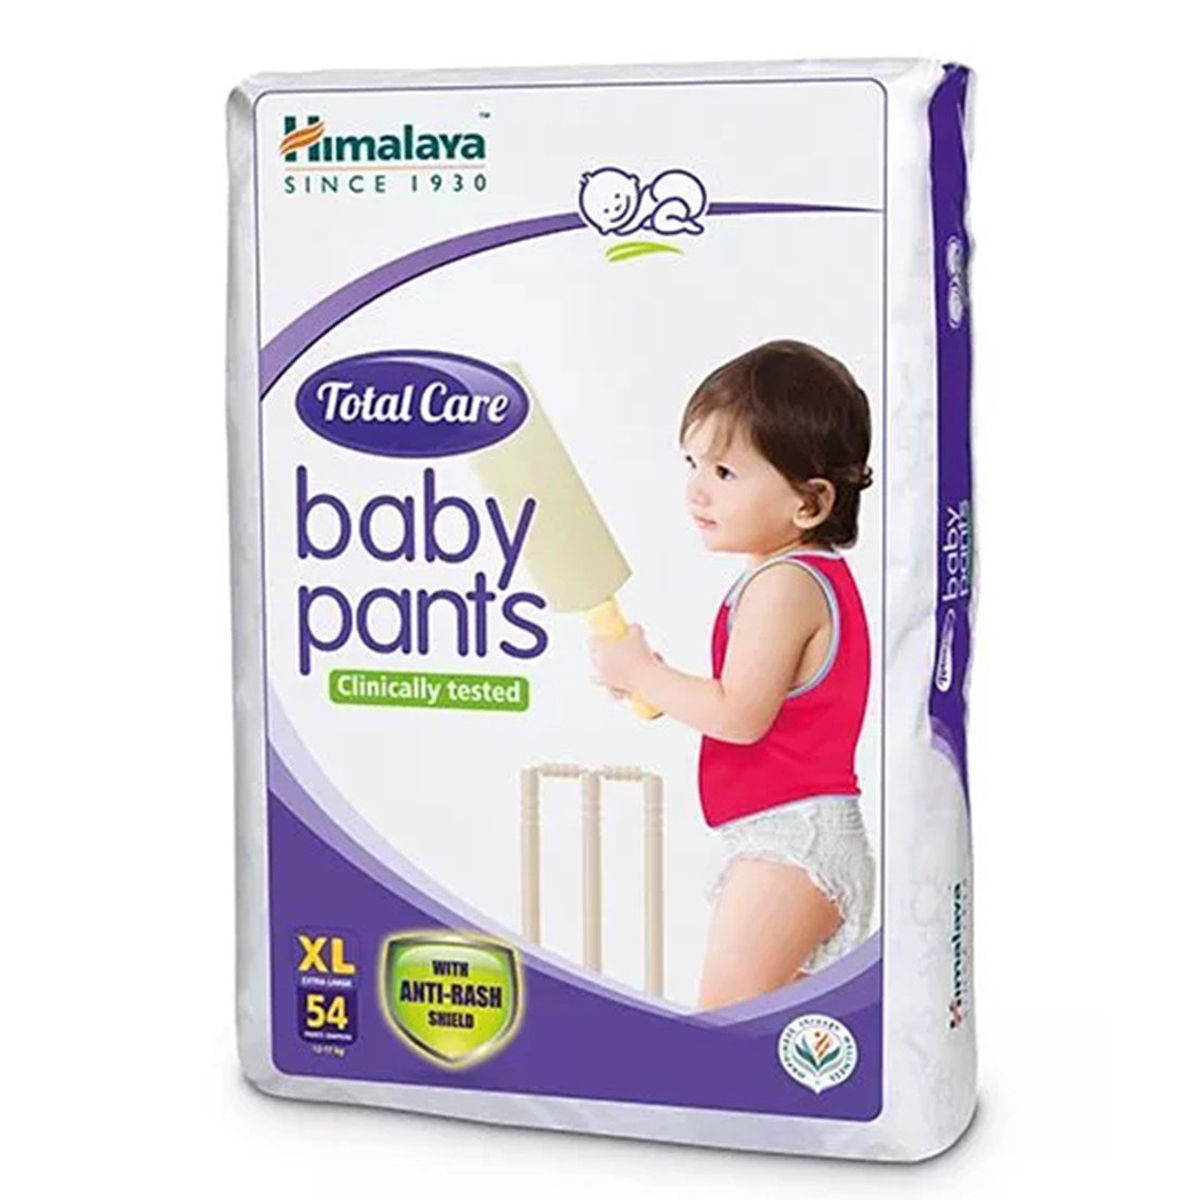 Himalaya Total Care Baby Diaper Pants XL, 54 Count, Pack of 1 